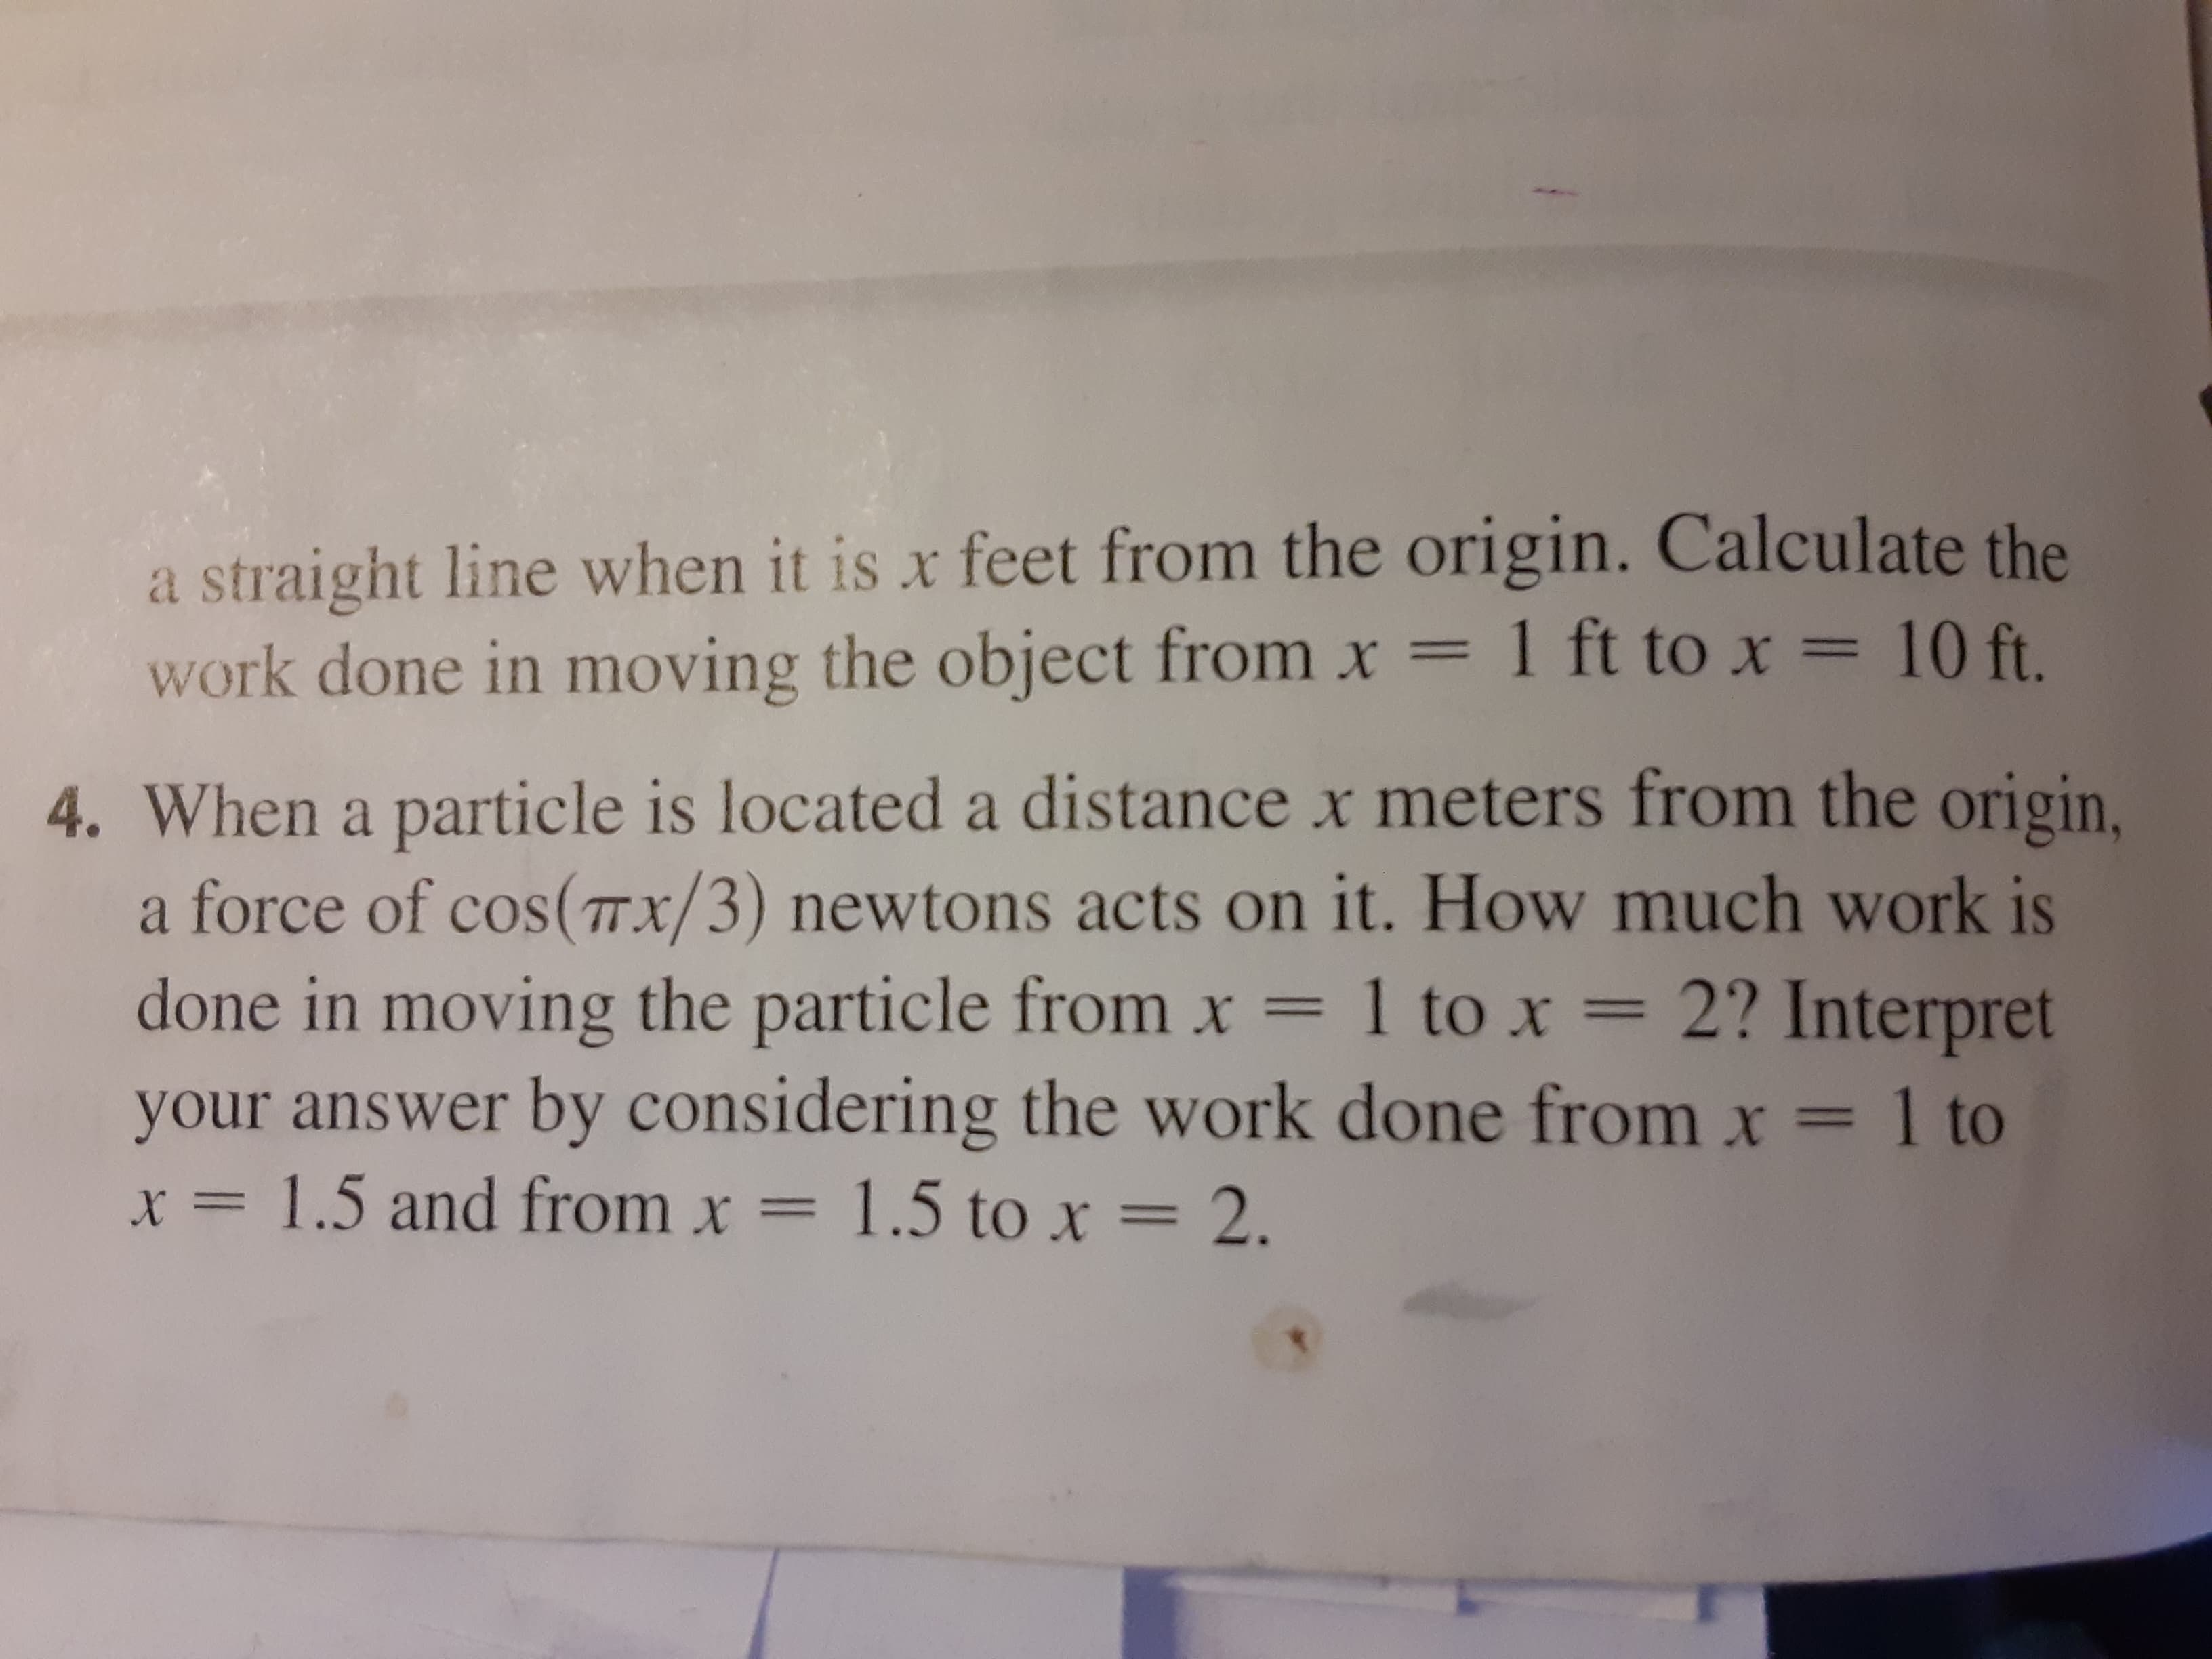 When a particle is located a distance x meters from the origin.
a force of cos(Tx/3) newtons acts on it. How much work is
done in moving the particle from x =
your answer by considering the work done from x = 1 to
x = 1.5 and from x = 1.5 to x = 2.
1 to x = 2? Interpret
%3D
%3D
%3D
